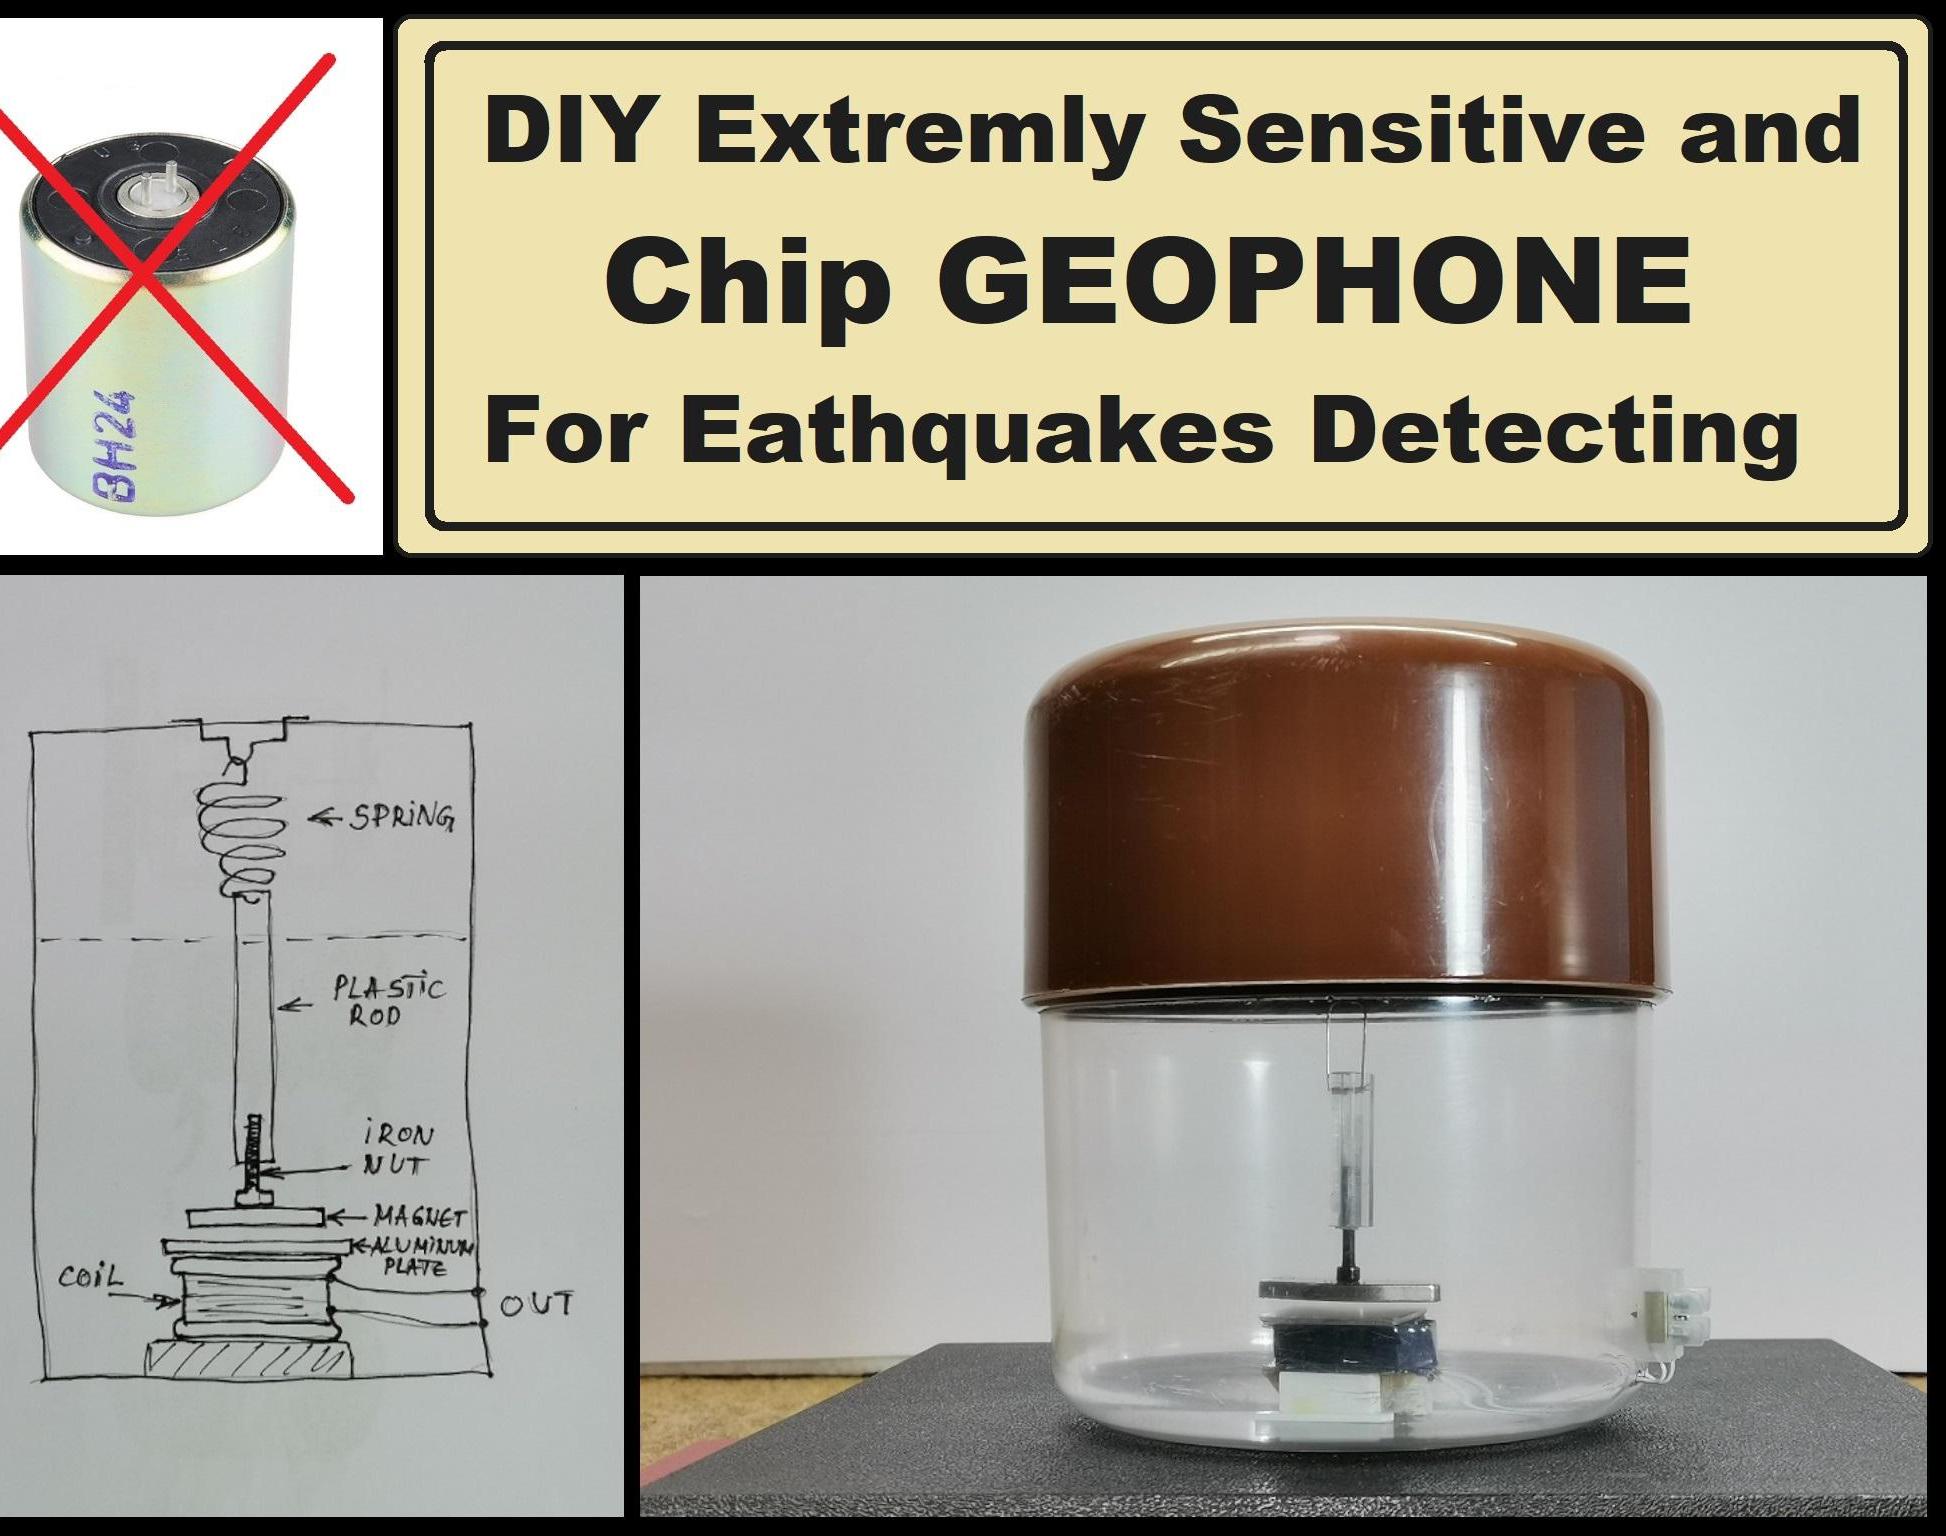 DIY Extremly Sensitive and Cheap Geophone Sensor for Earthquakes Detecting